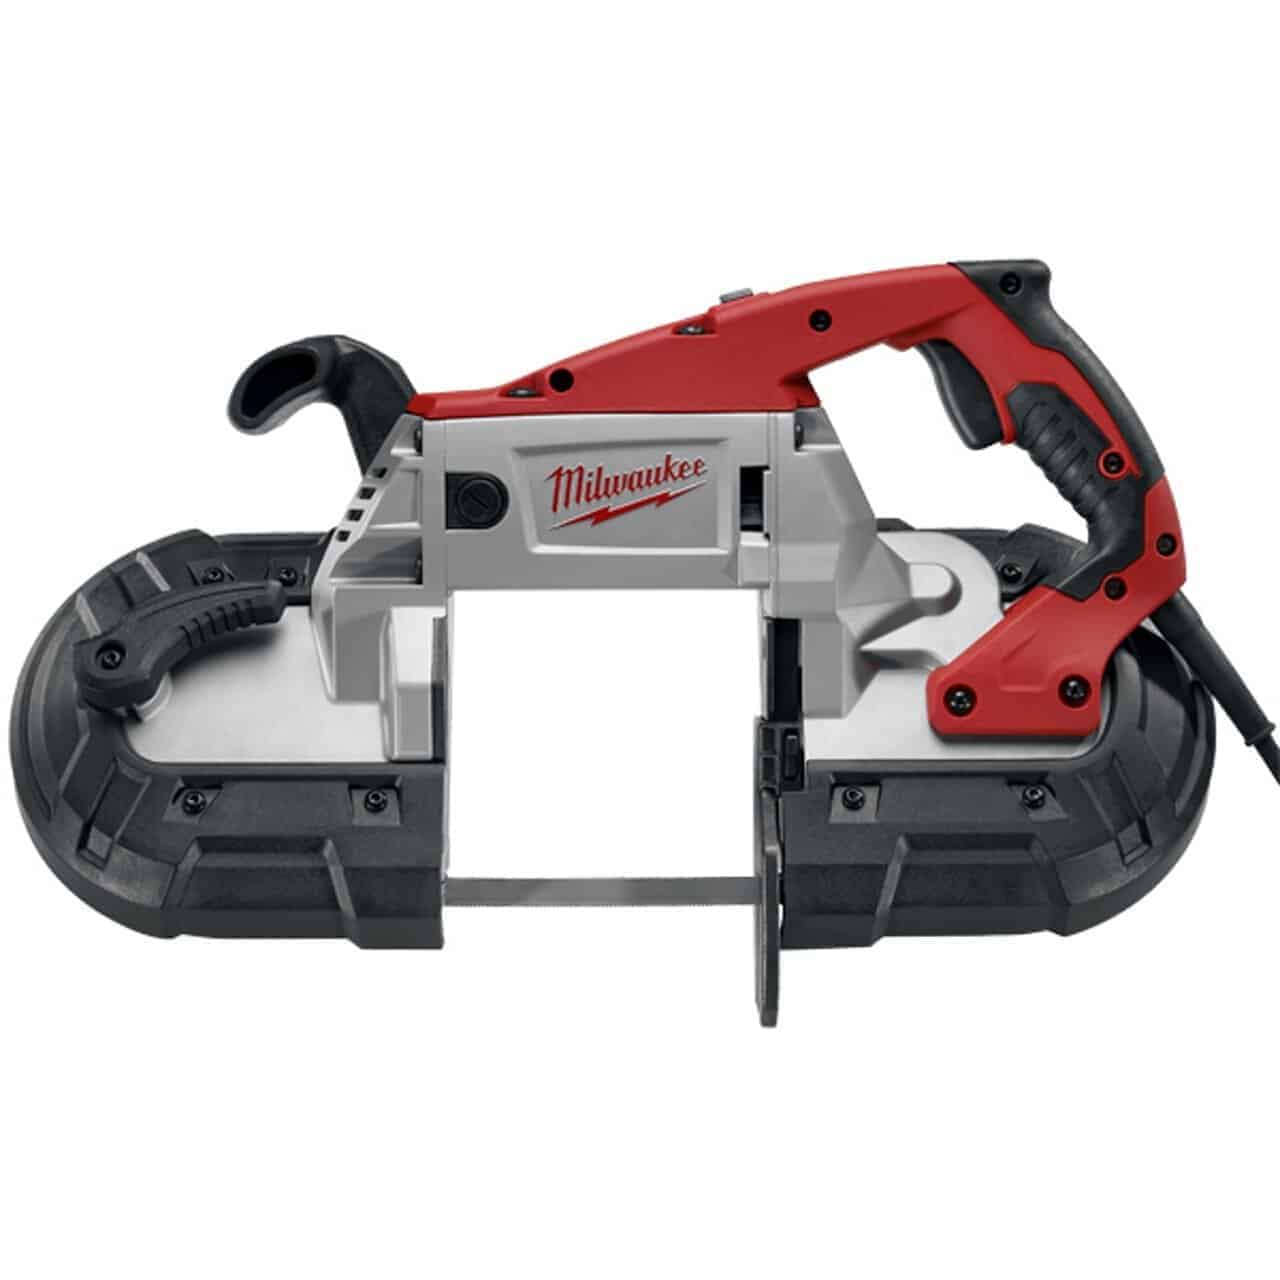 Milwaukee 6238-20 AC:DC Deep Cut Portable Two-Speed Band Saw review